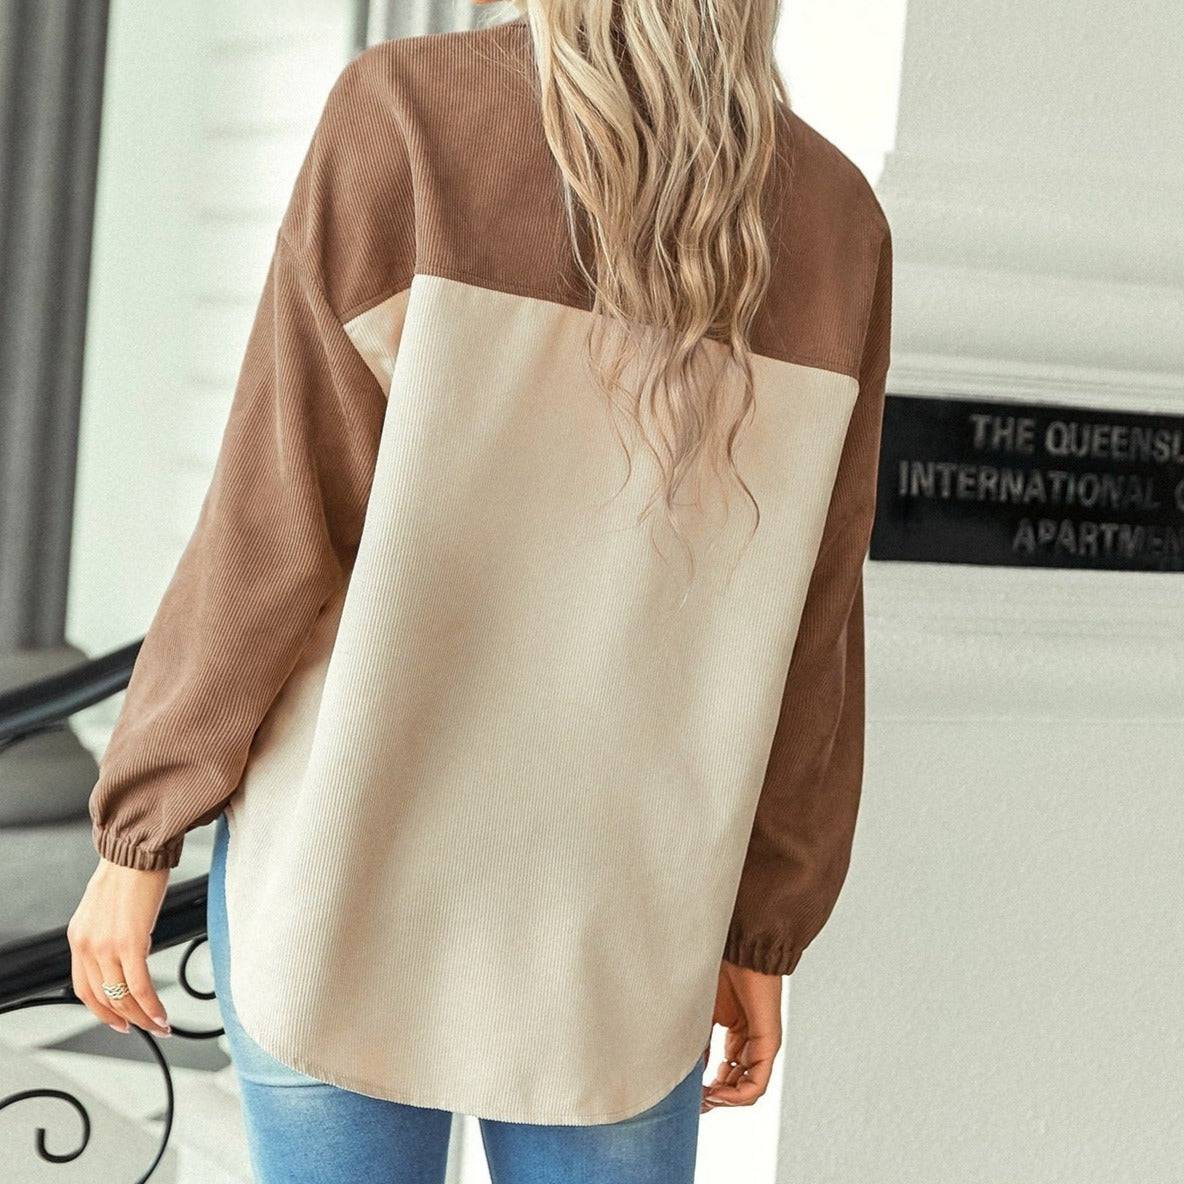 Audrey Long Sleeve Colorblock Loose Top - Hot fashionista